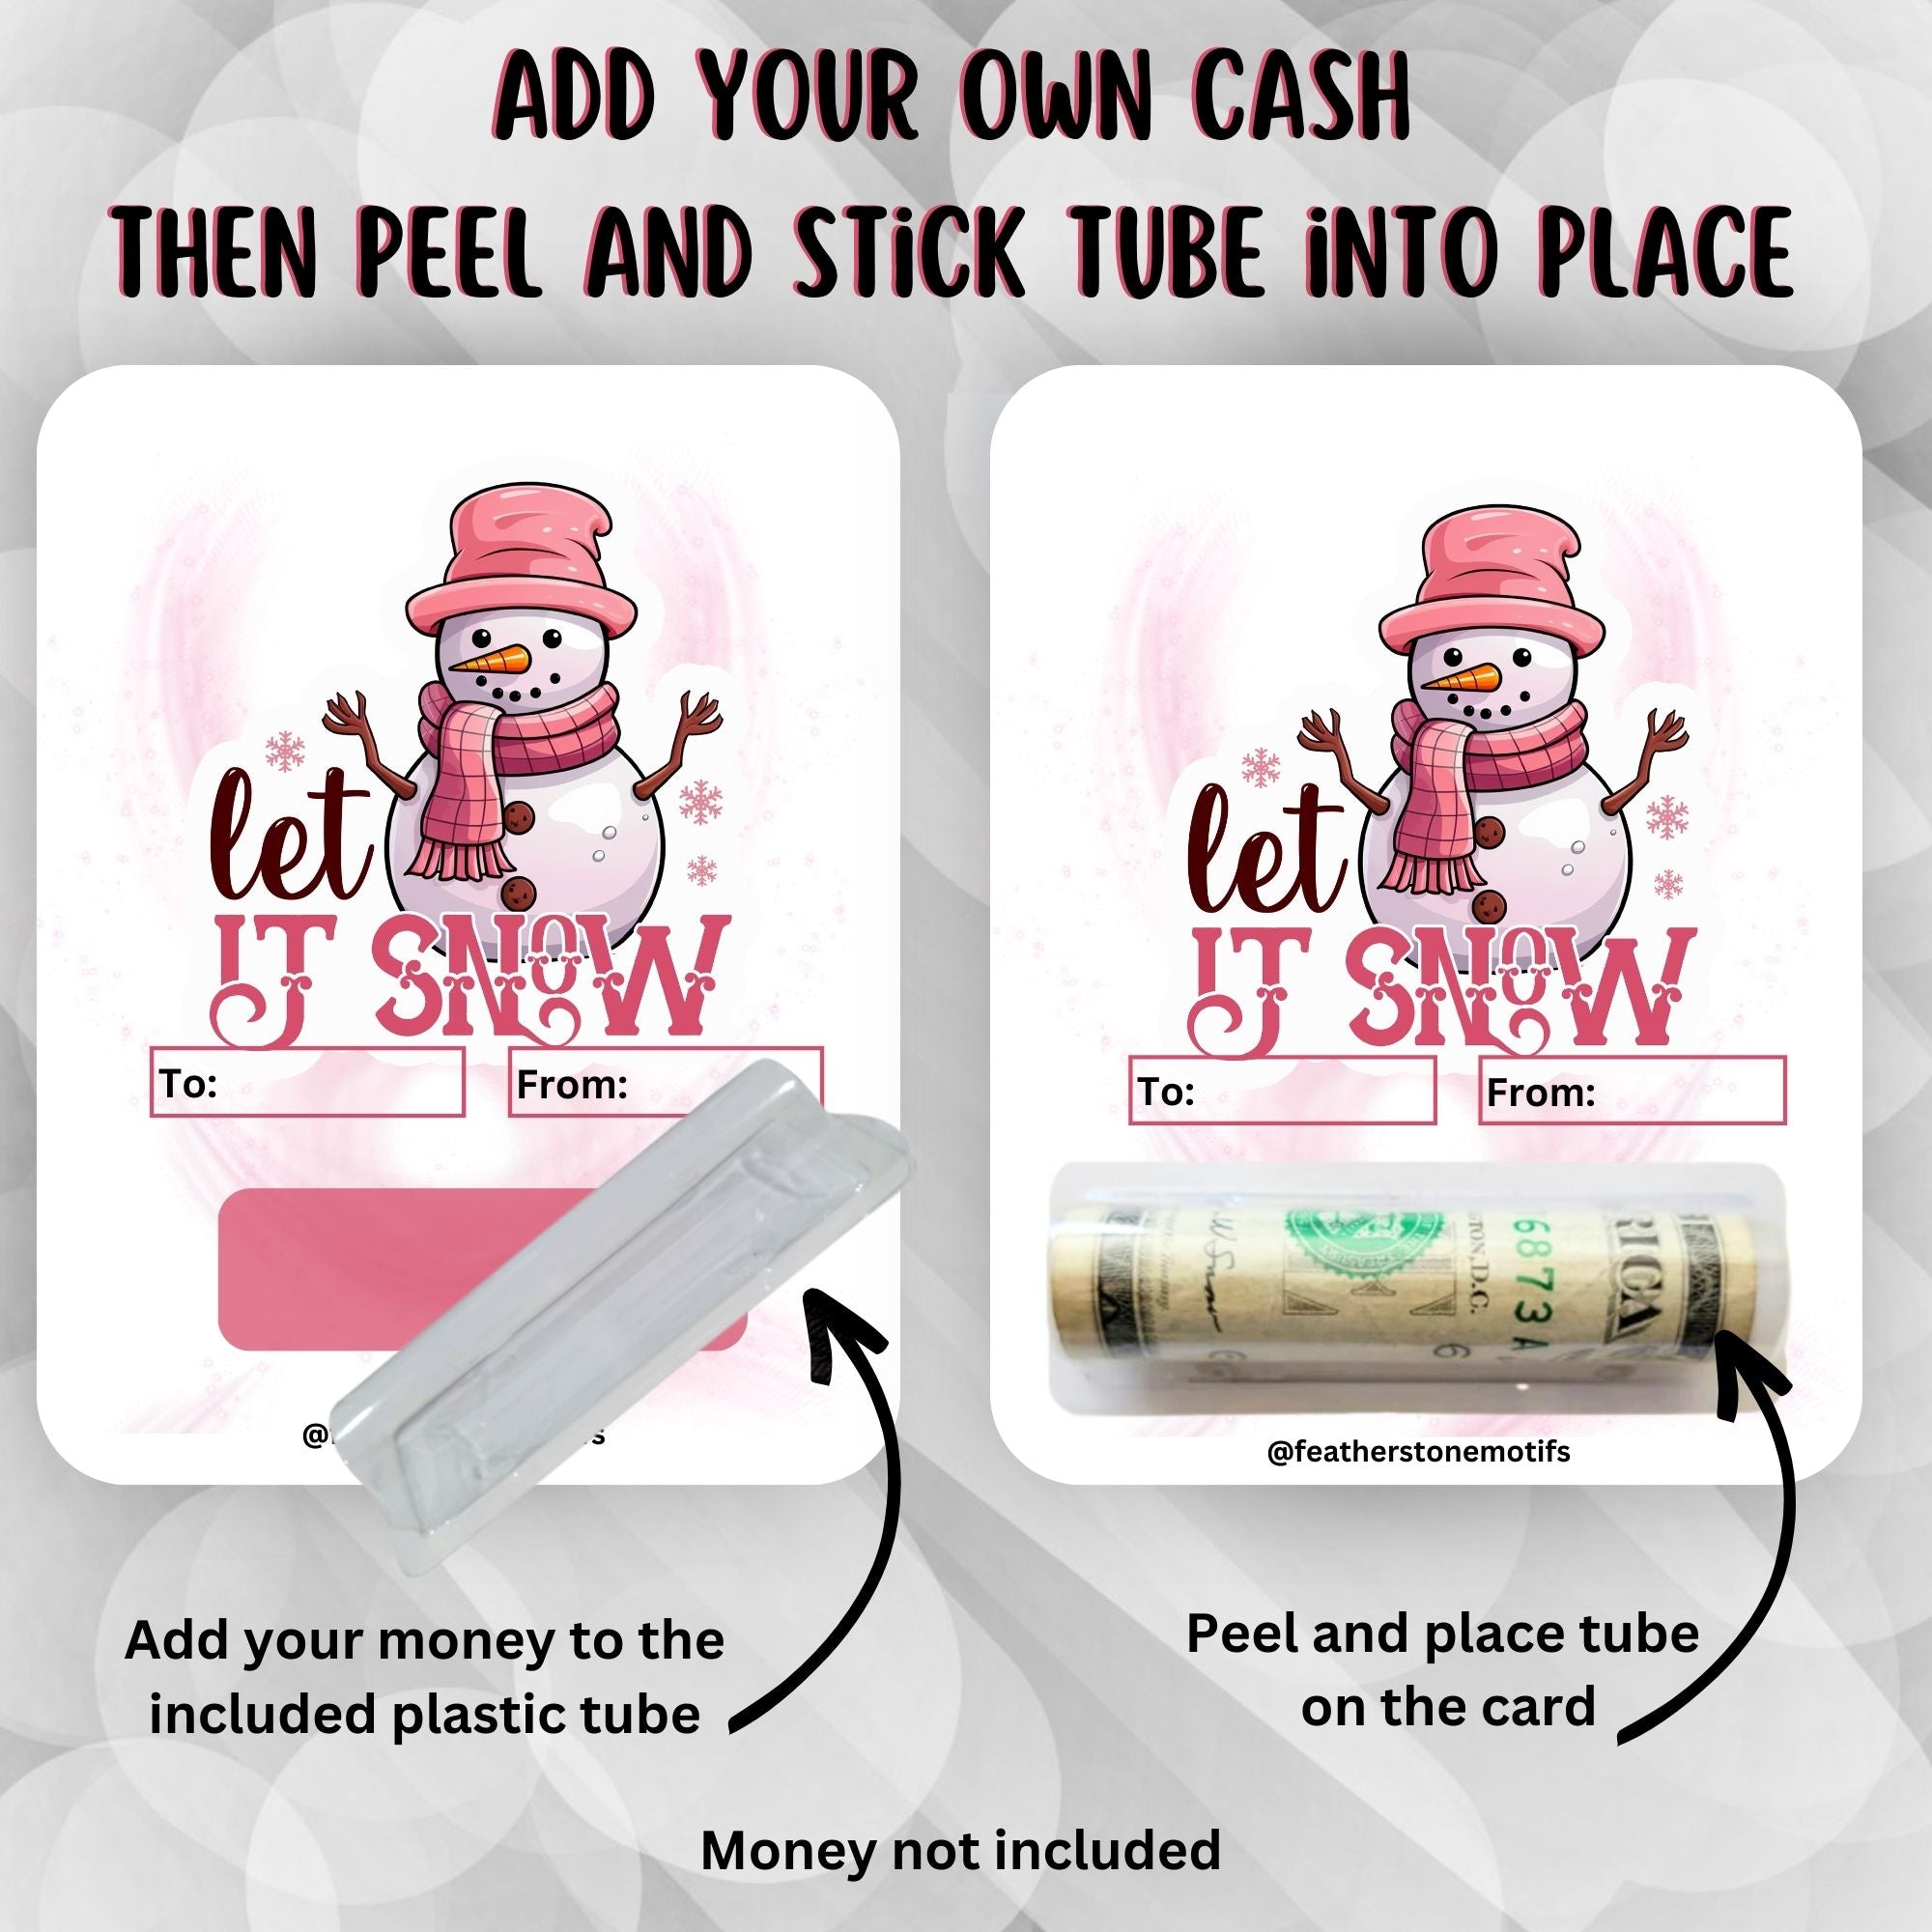 This image shows how to attach the money tube to the Let it Snow Money Card.